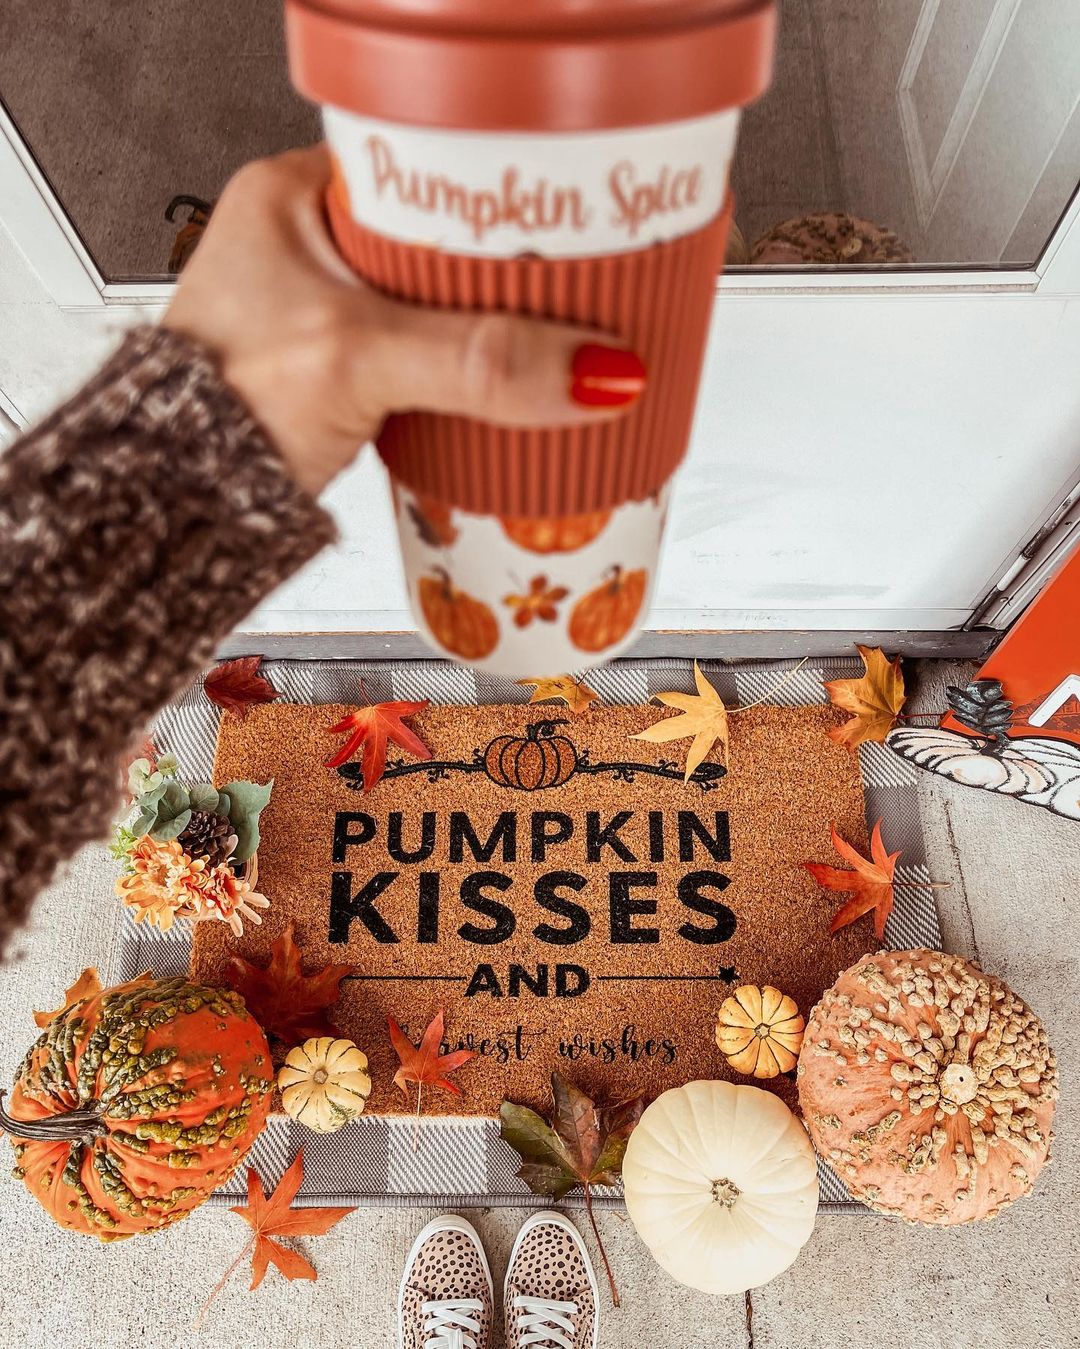 Pumpkin Kisses and Harvest Wishes | Coco Mats N More